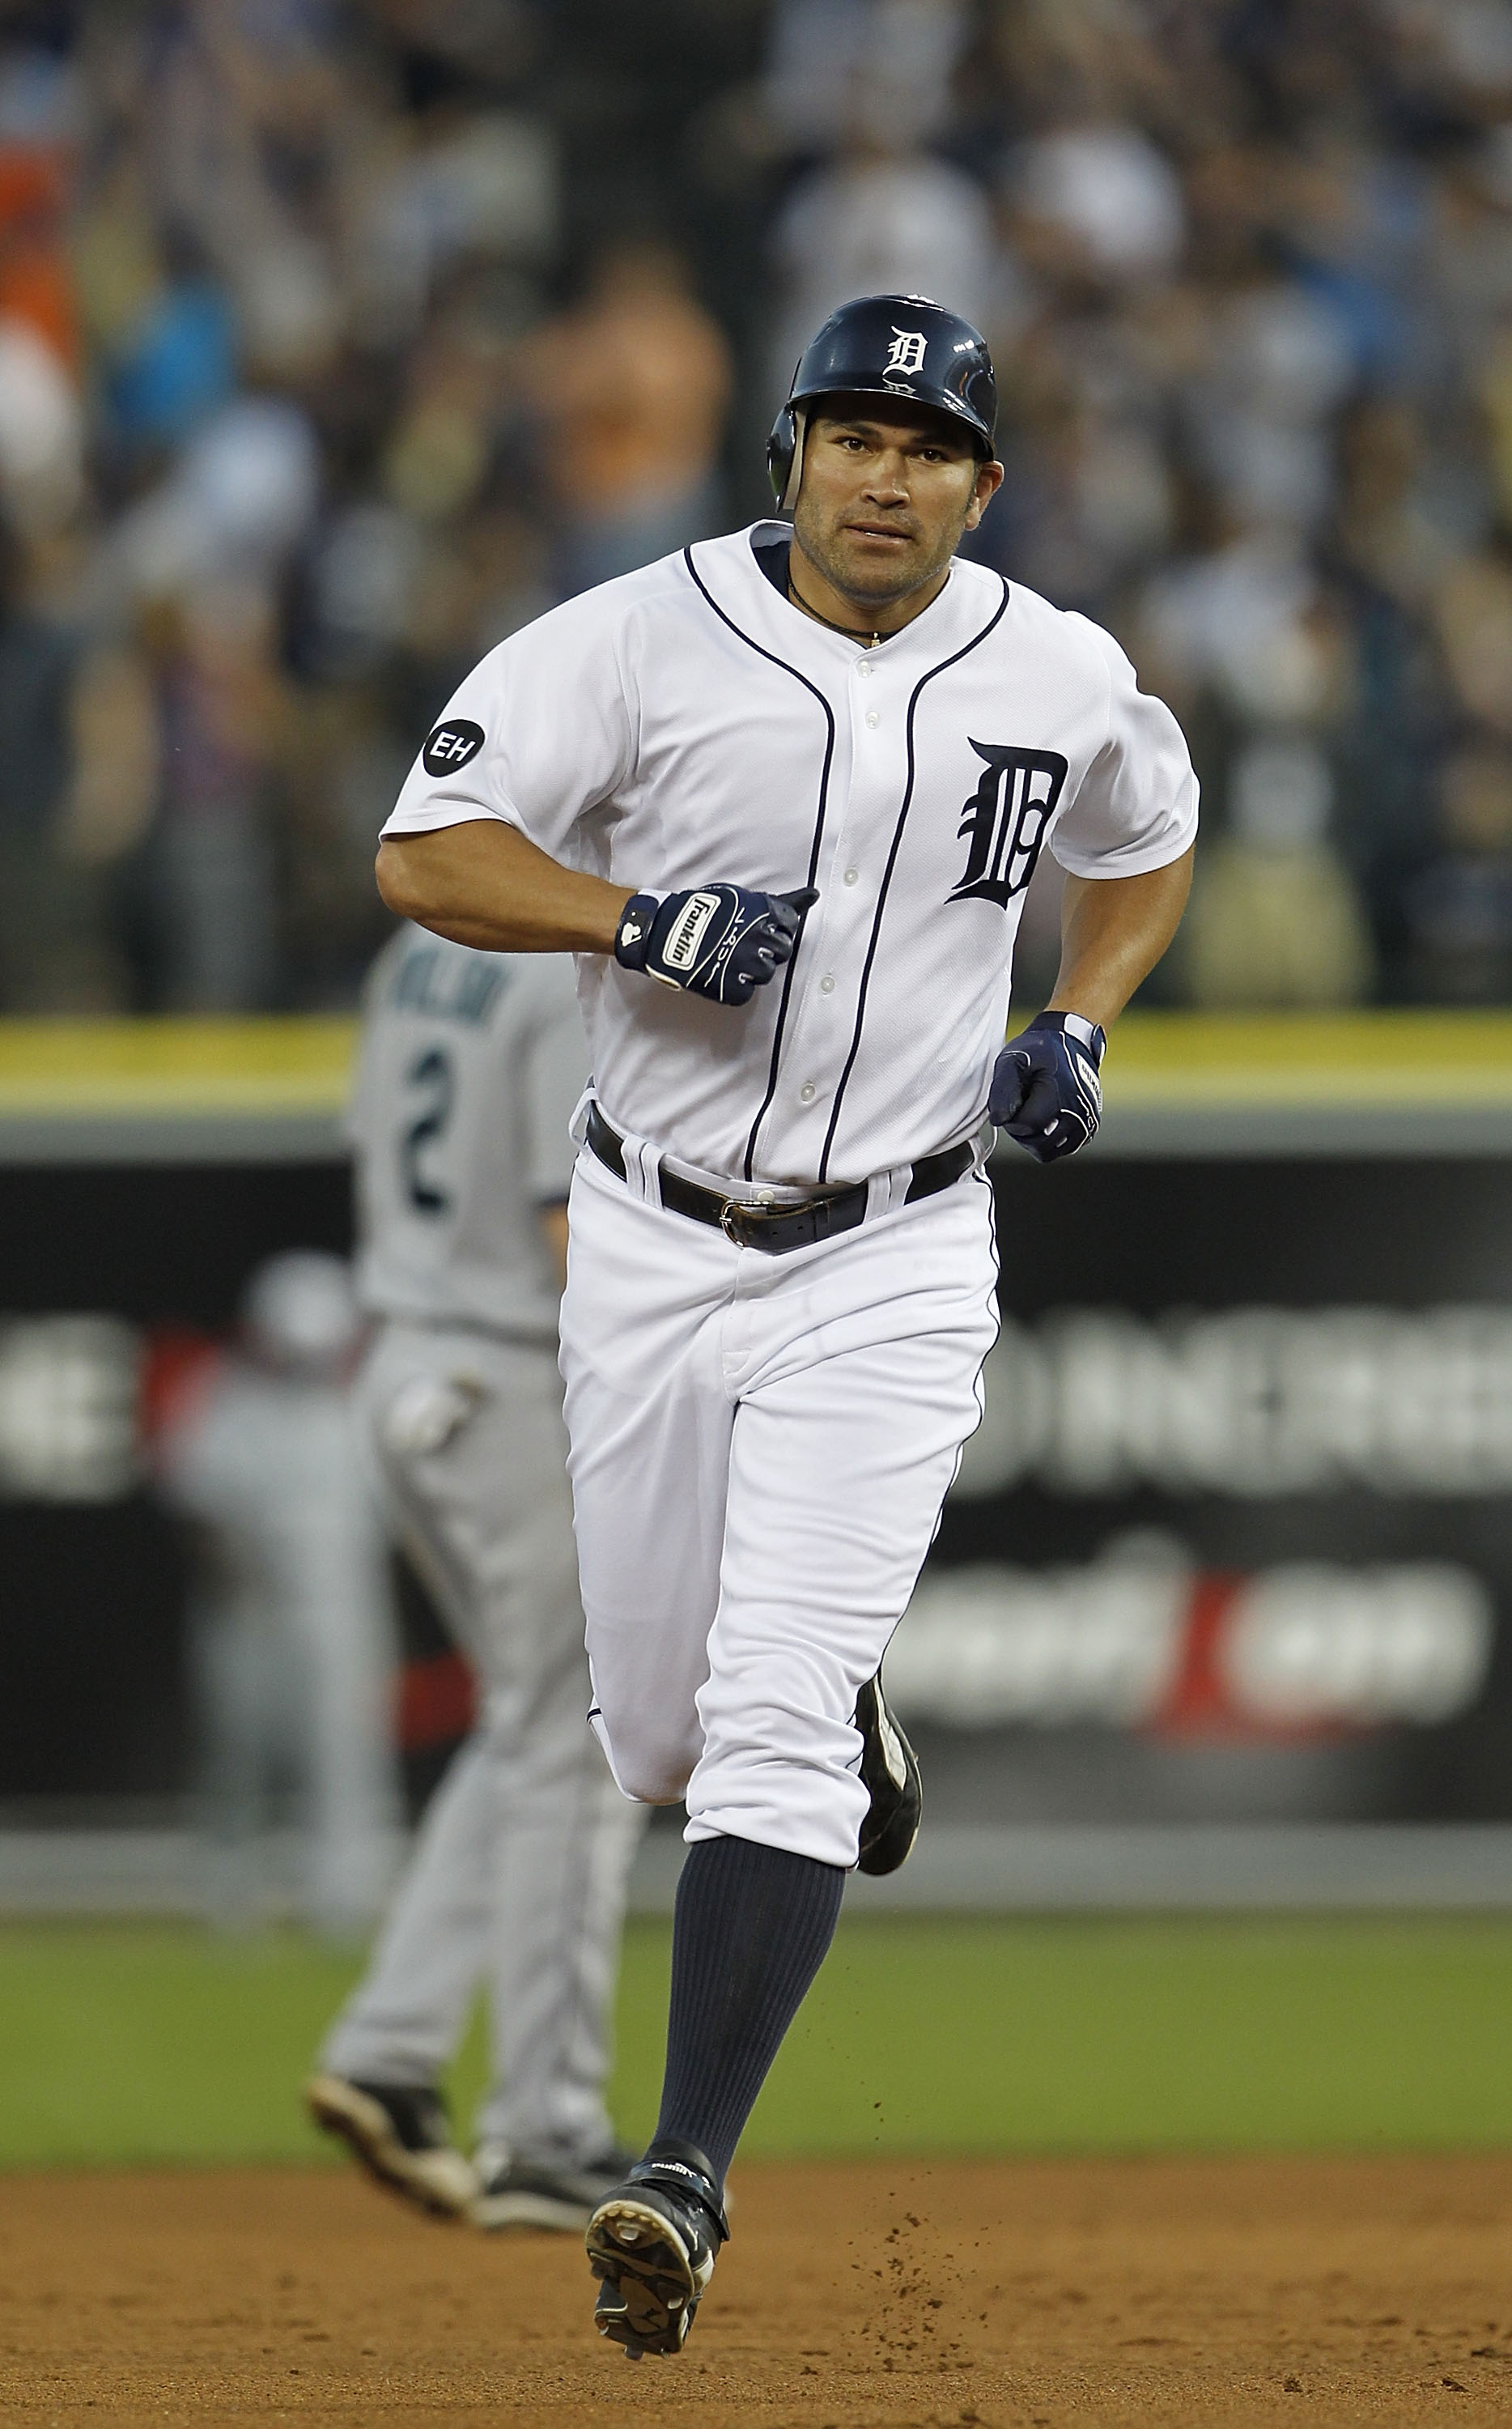 DETROIT - JULY 02:  Johnny Damon #18 of the Detroit Tigers hits a seventh inning two run home run during the game against the Seattle Mariners on July 2, 2010 at Comerica Park in Detroit, Michigan.  (Photo by Leon Halip/Getty Images)